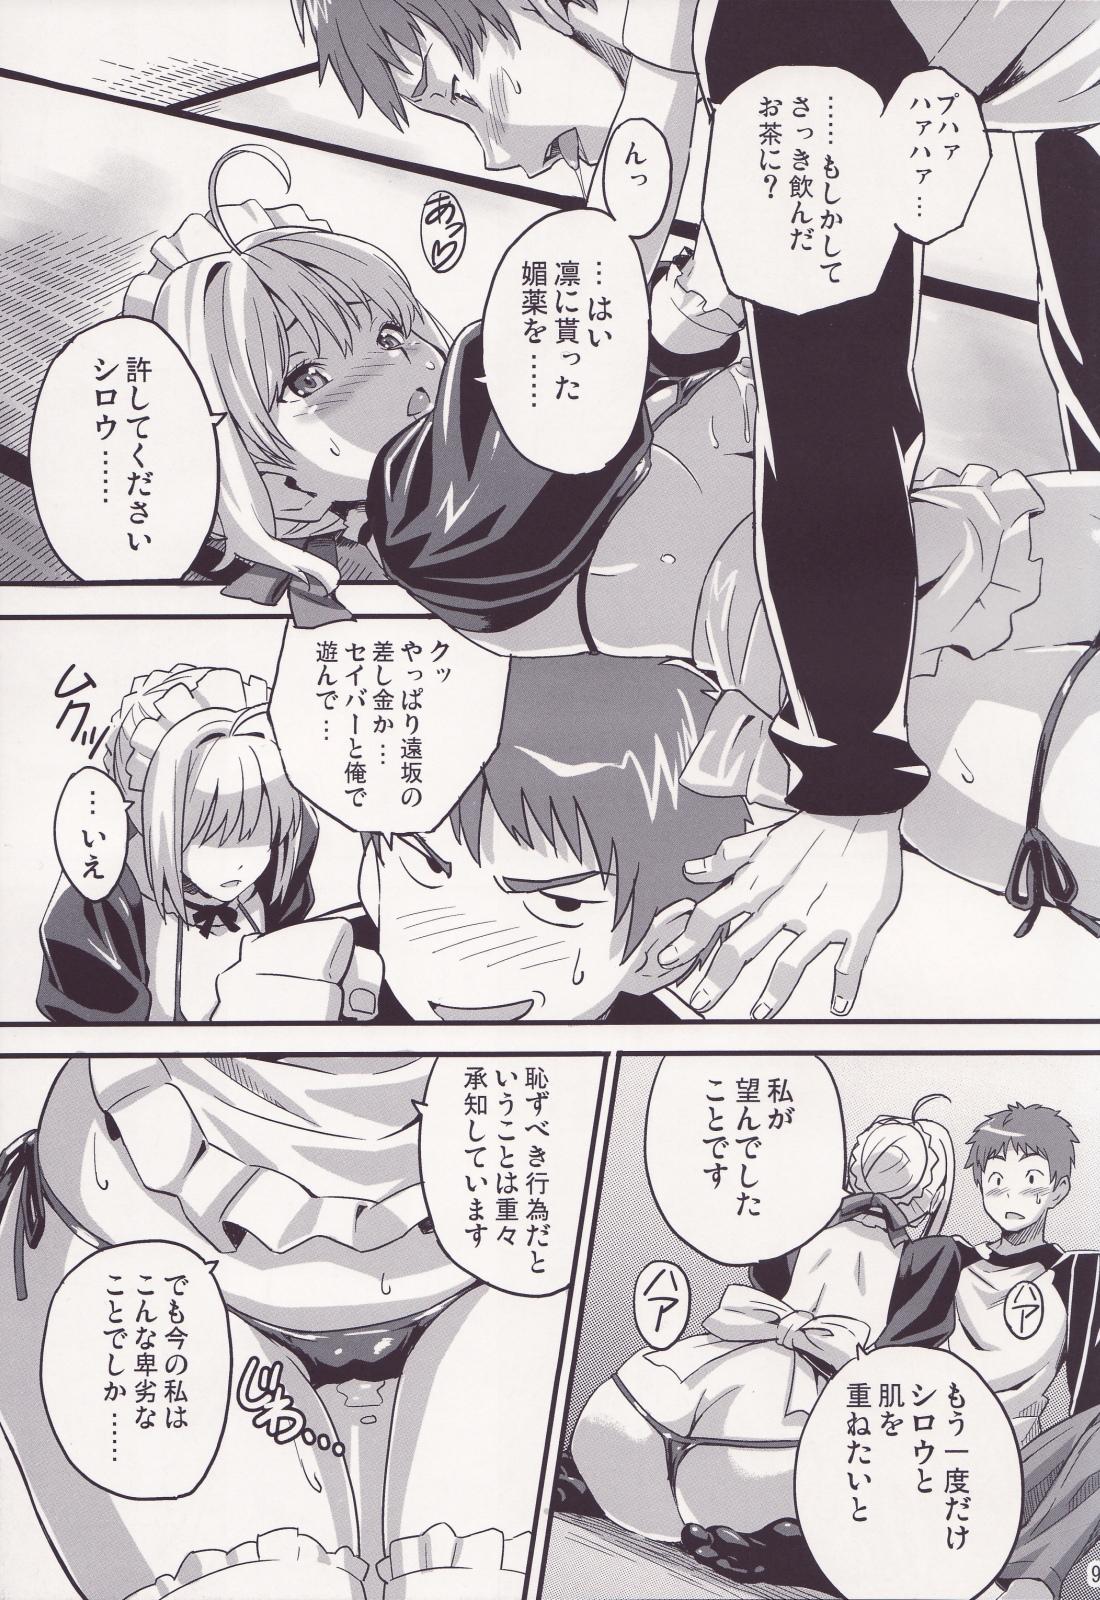 Tied Outama King of Soul - Fate stay night Teensnow - Page 8